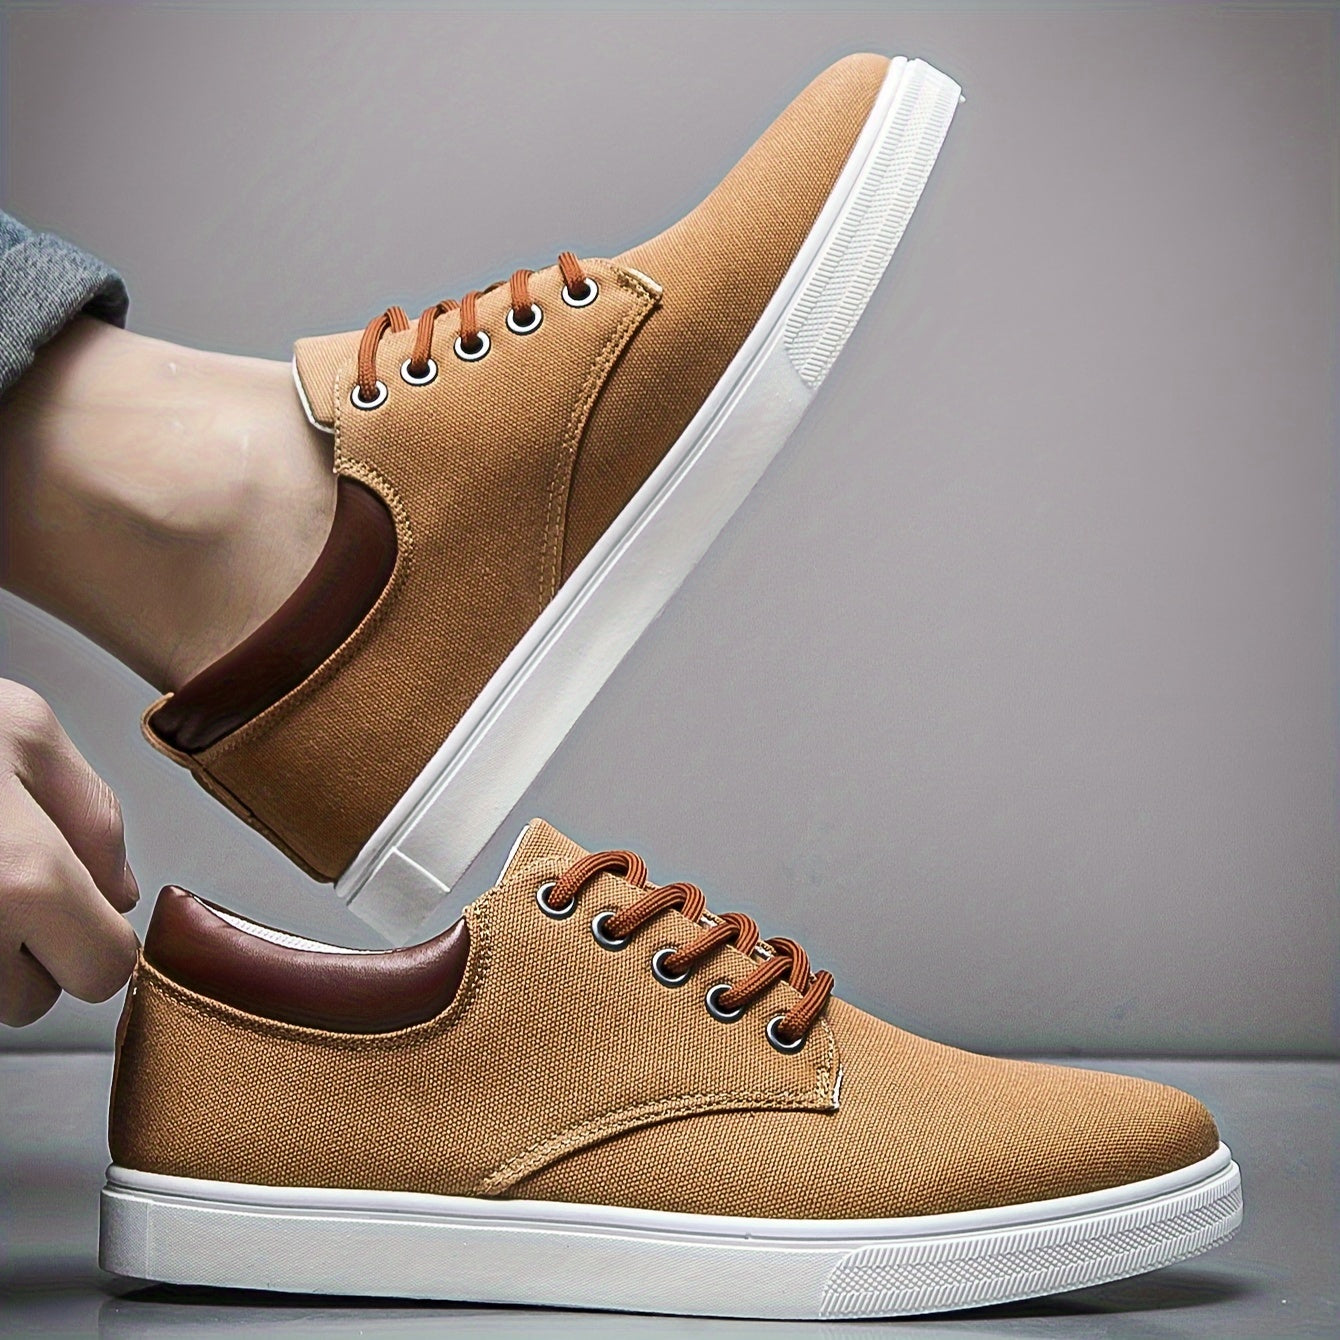 Men's Trendy Solid Skate Shoes - Comfy Non-Slip Casual Lace-Up Sneakers for Outdoor Activities